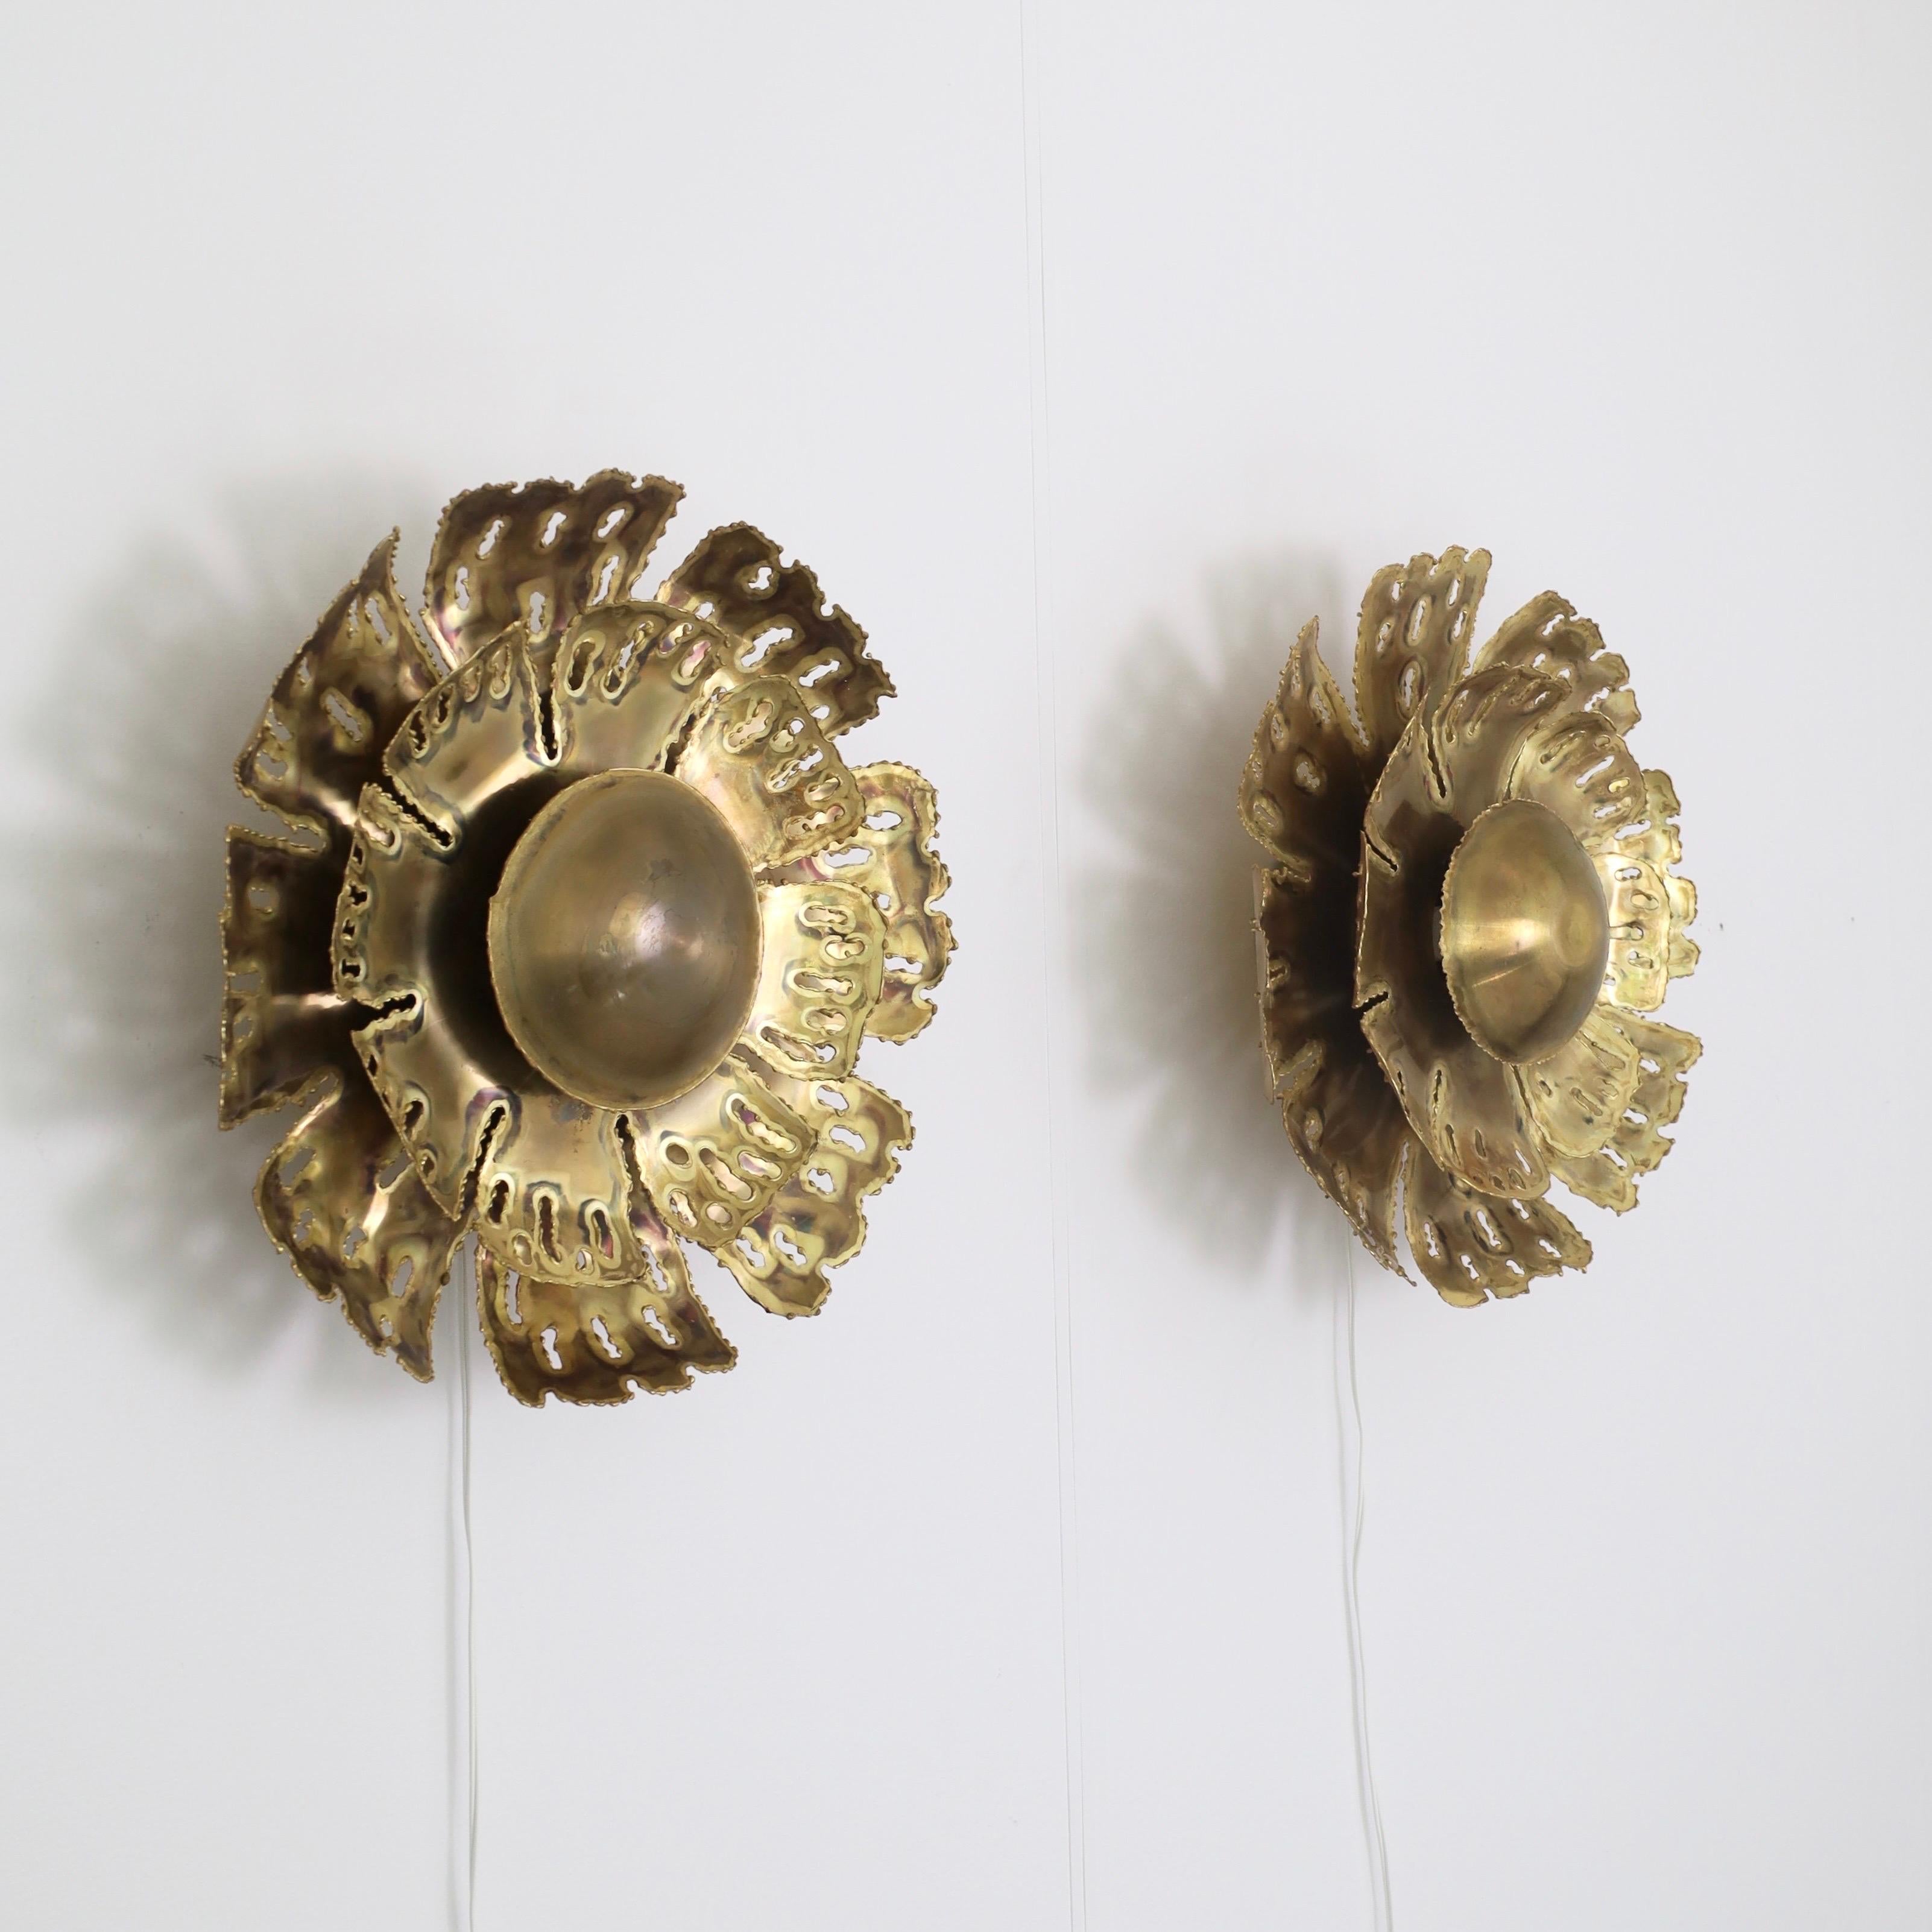 Brutalist Set of Large Brass Wall Lamps by Svend Aage Holm Sorensen, 1960s, Denmark For Sale